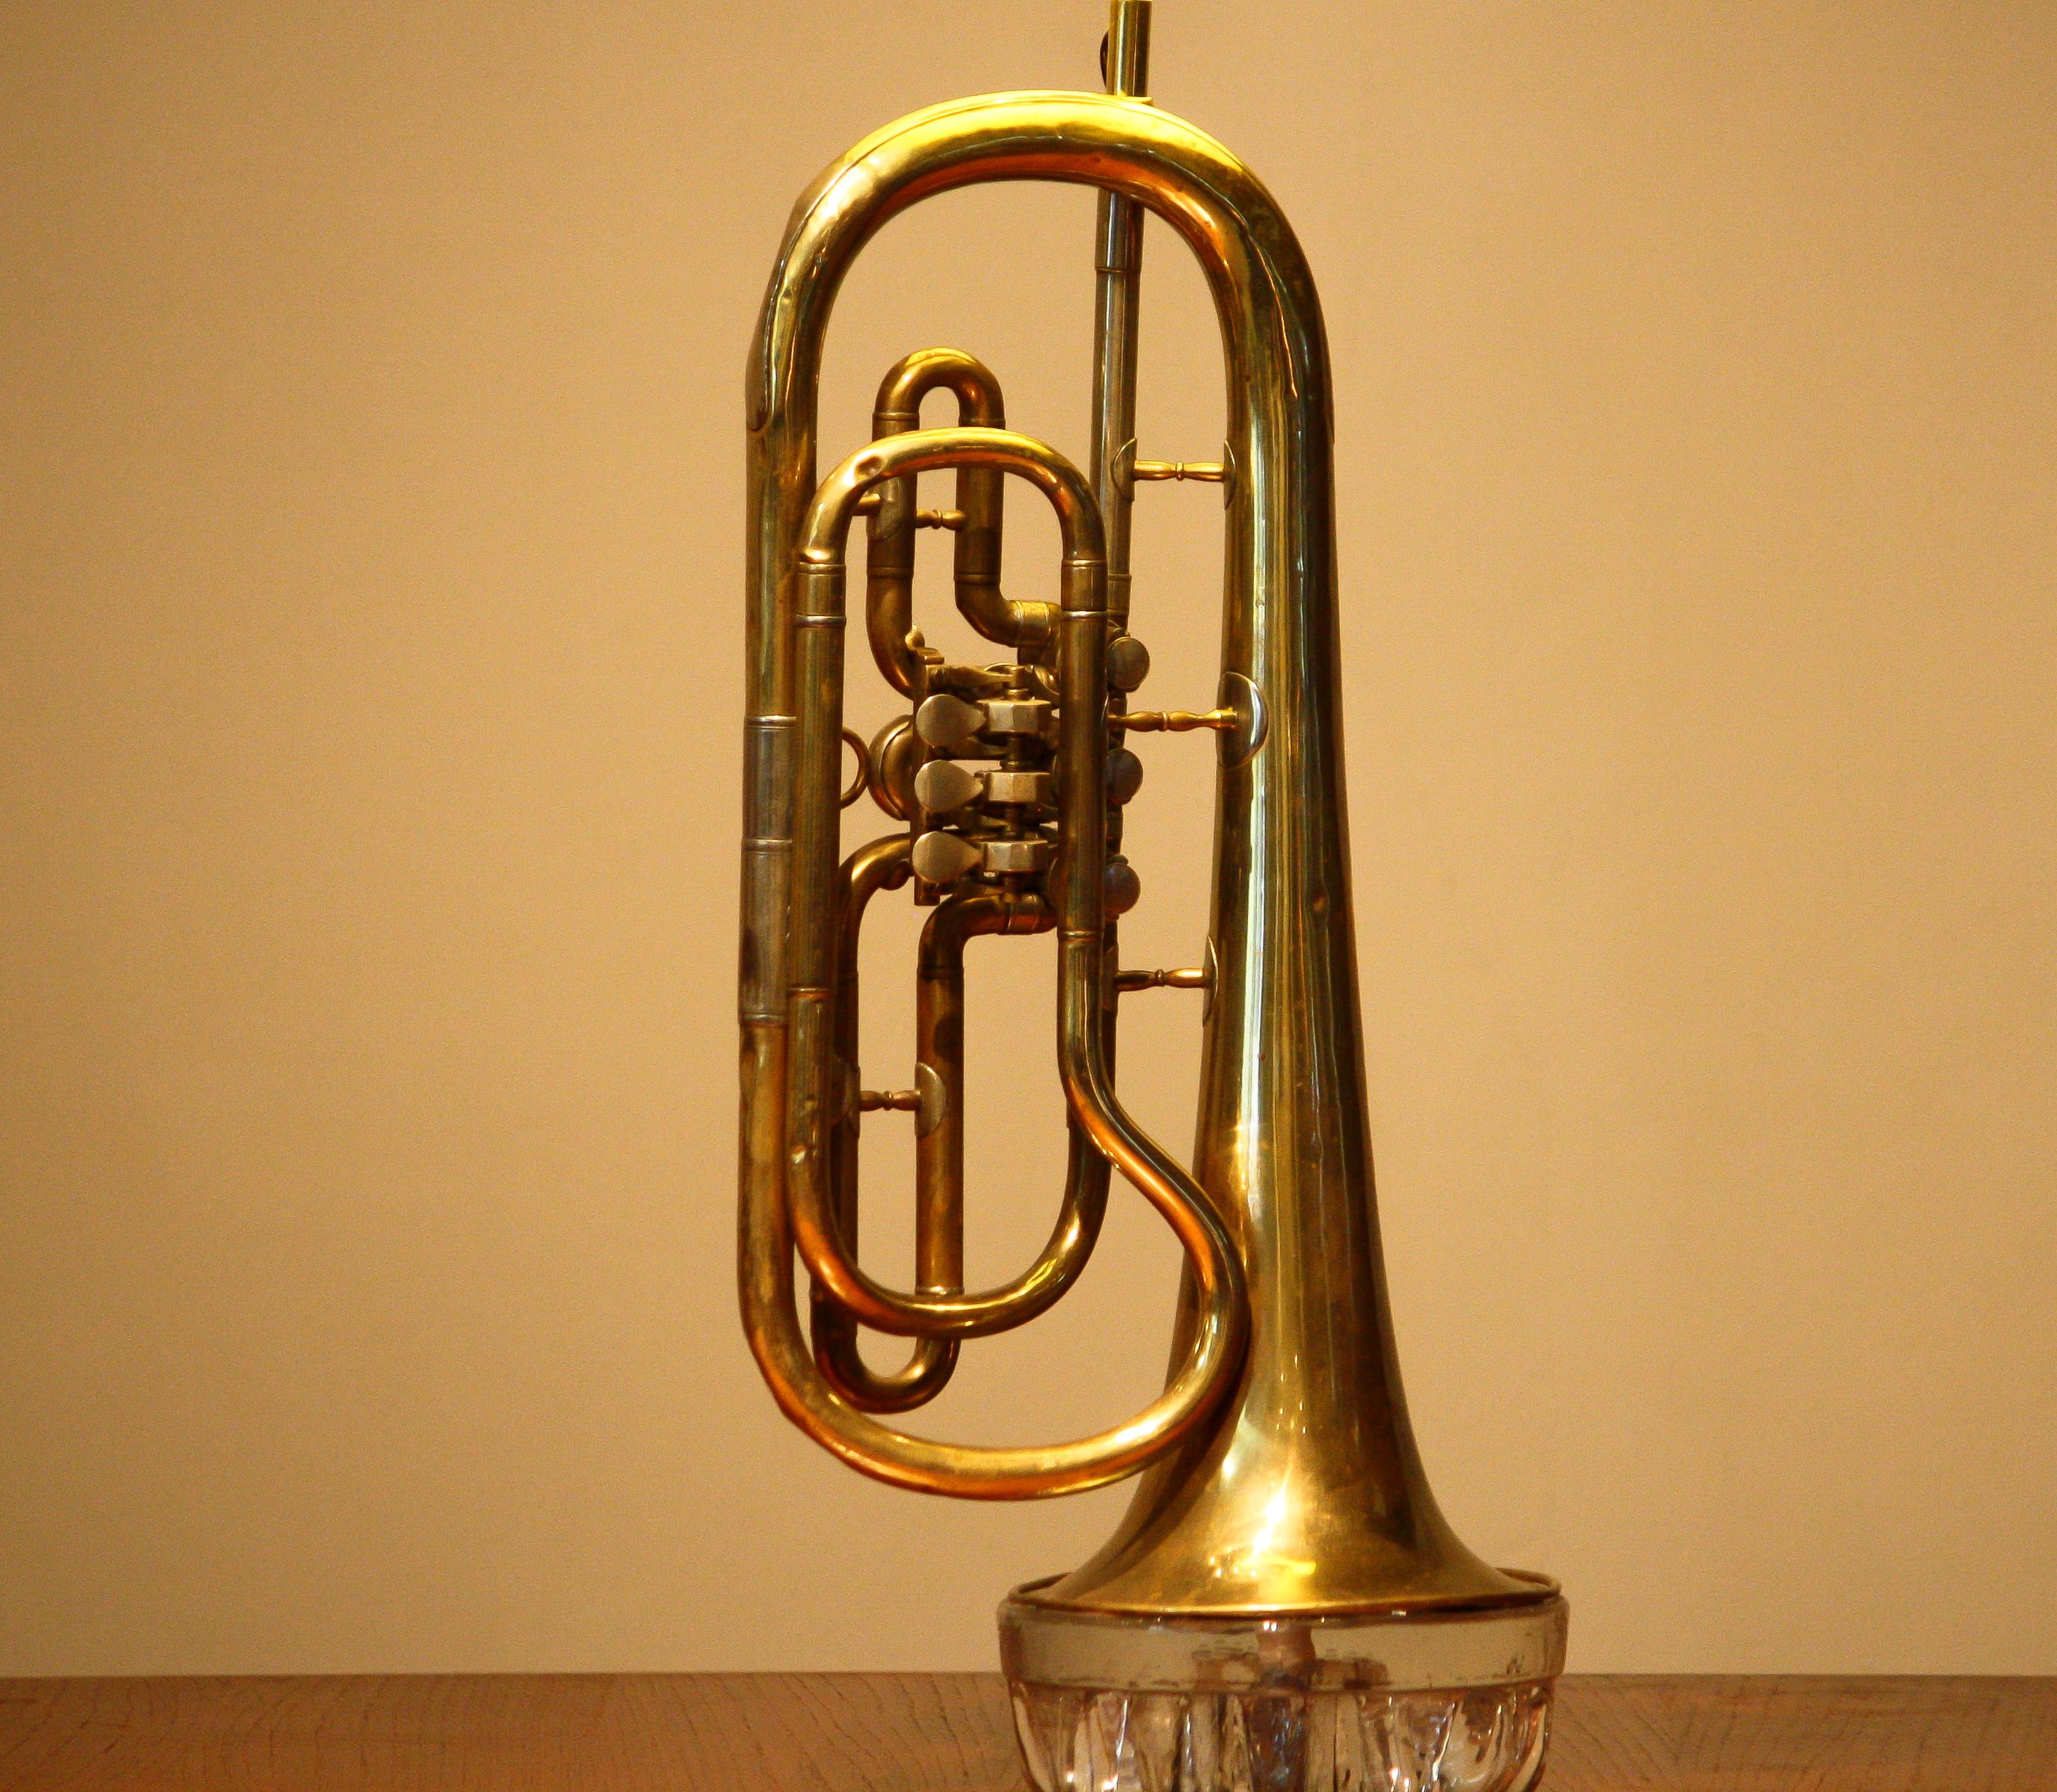 Early 20th Century Table Lamp Made of an American Cornet Flaps Trumpet from 1920s, Art Deco